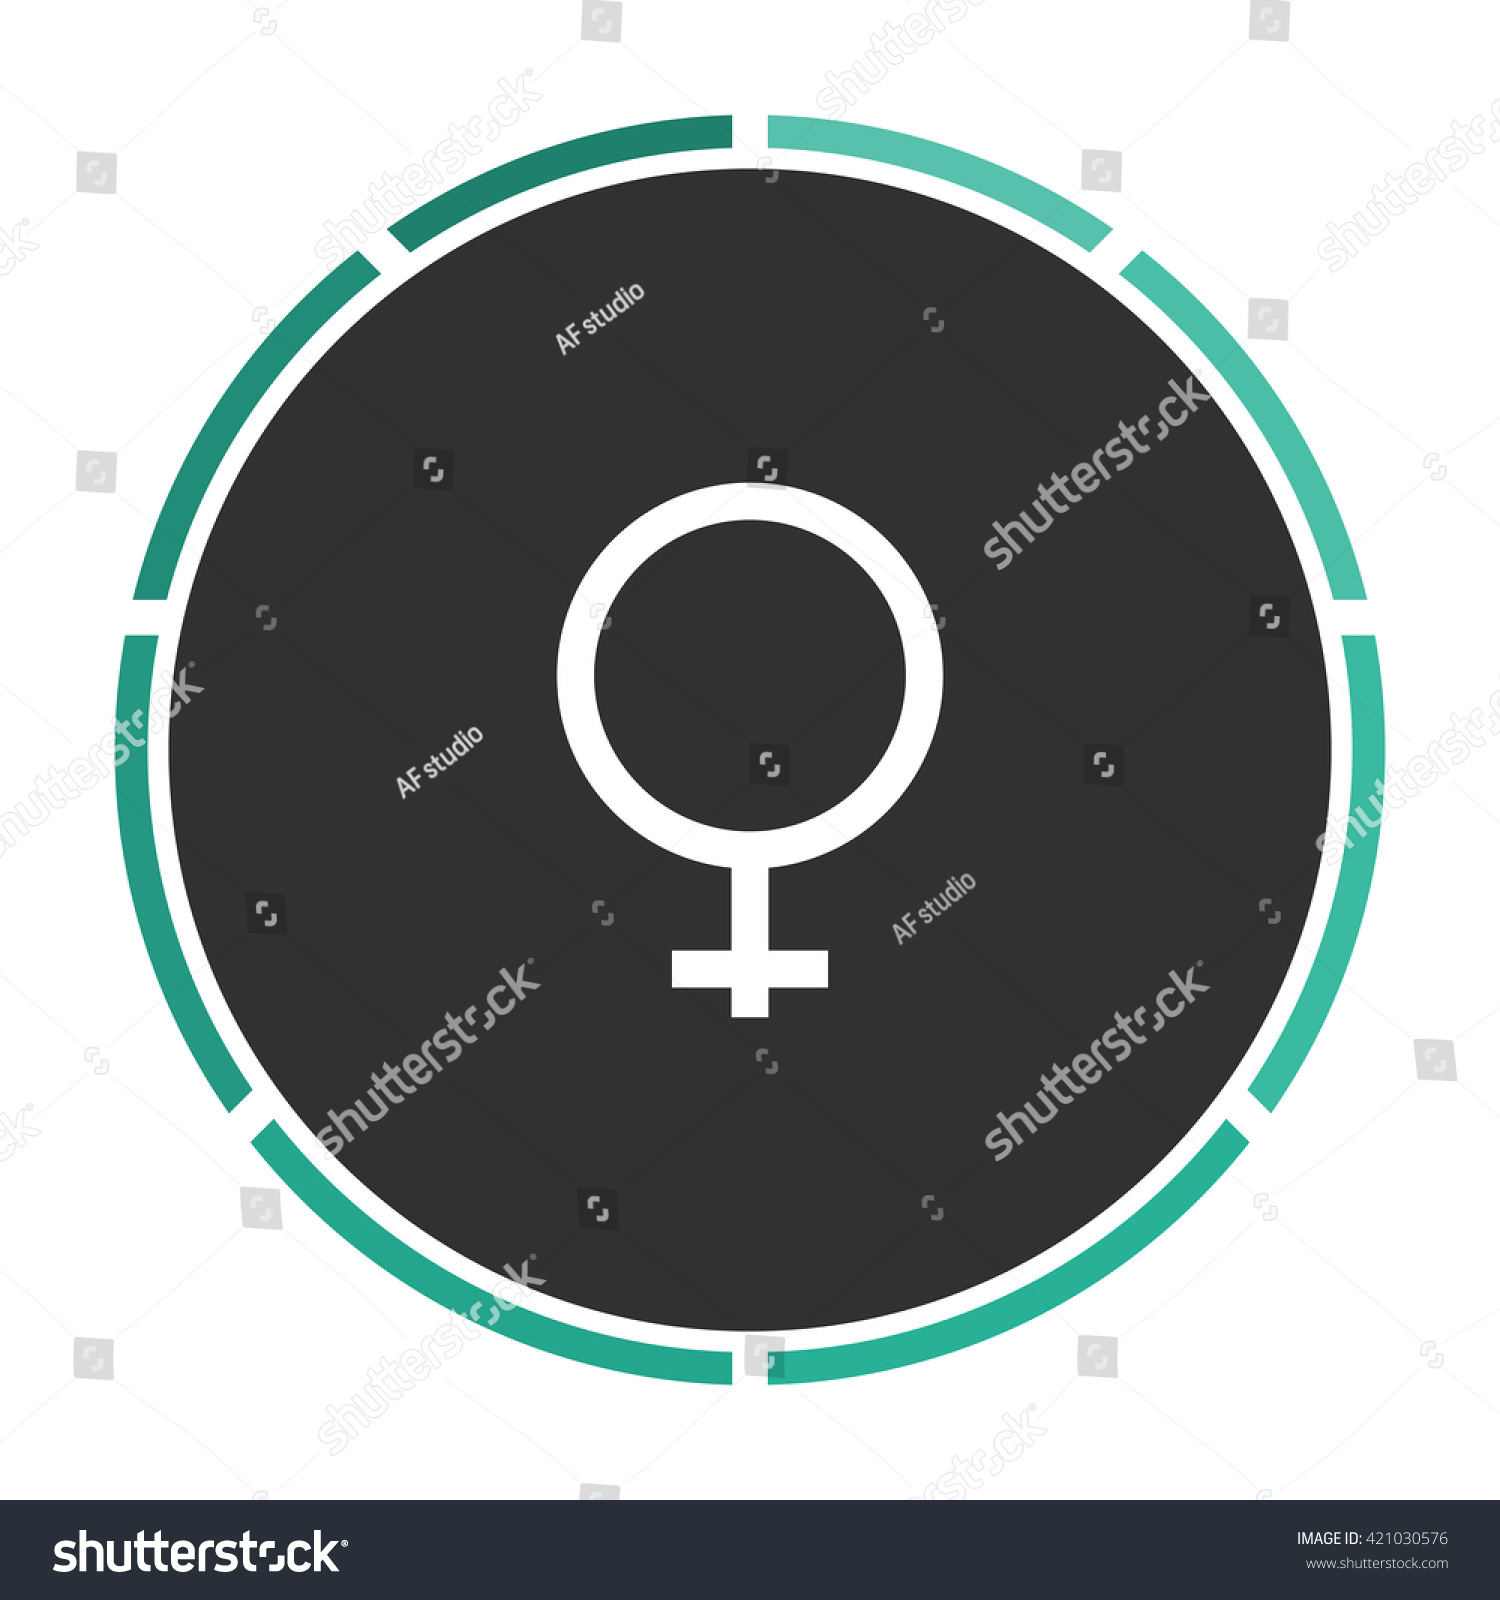 Woman Sex Simple Flat White Vector Stock Vector Royalty Free 421030576 Shutterstock 3456